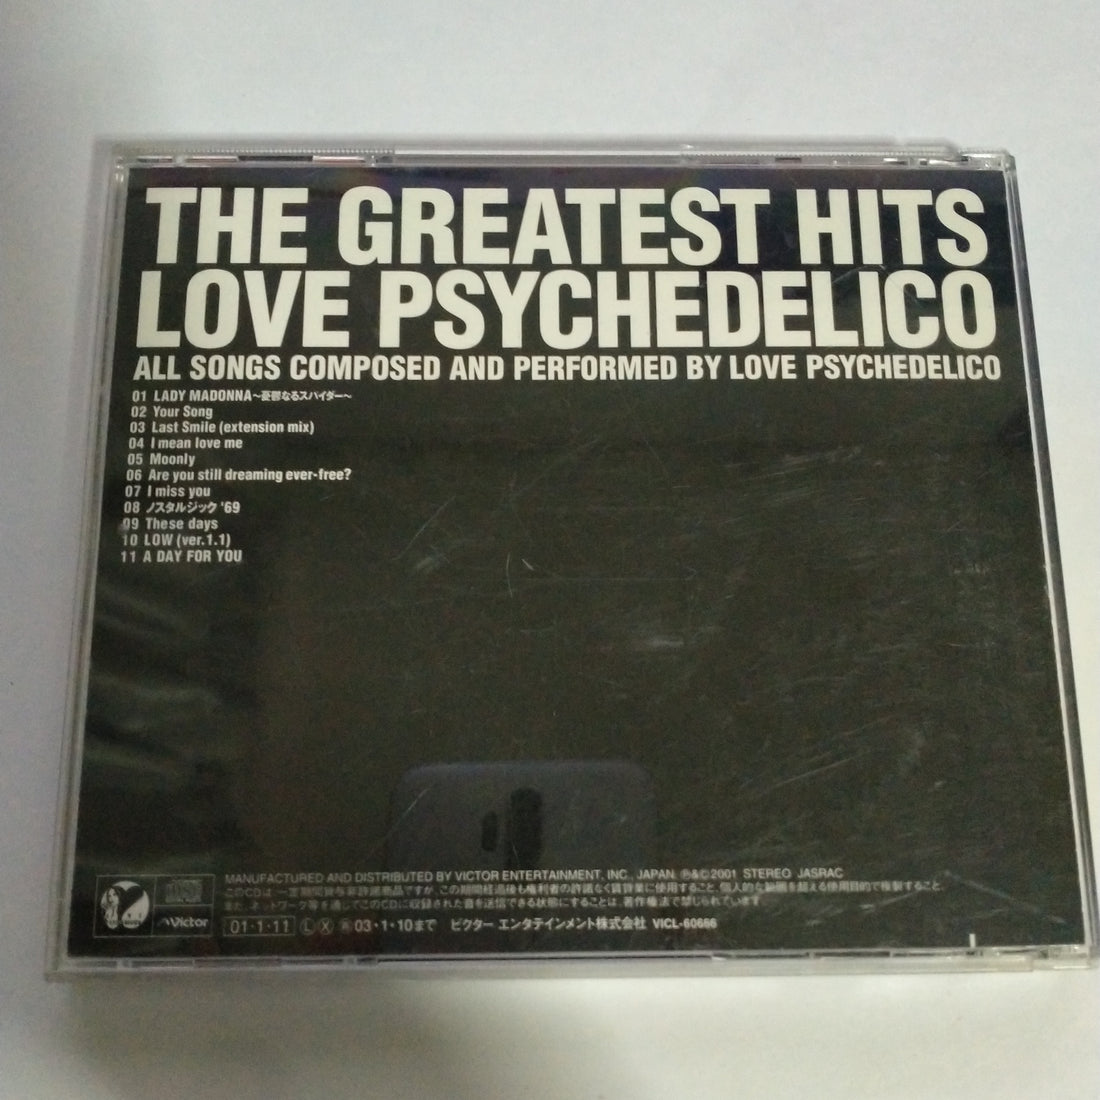 Buy Love Psychedelico : The Greatest Hits (CD) Online for a great